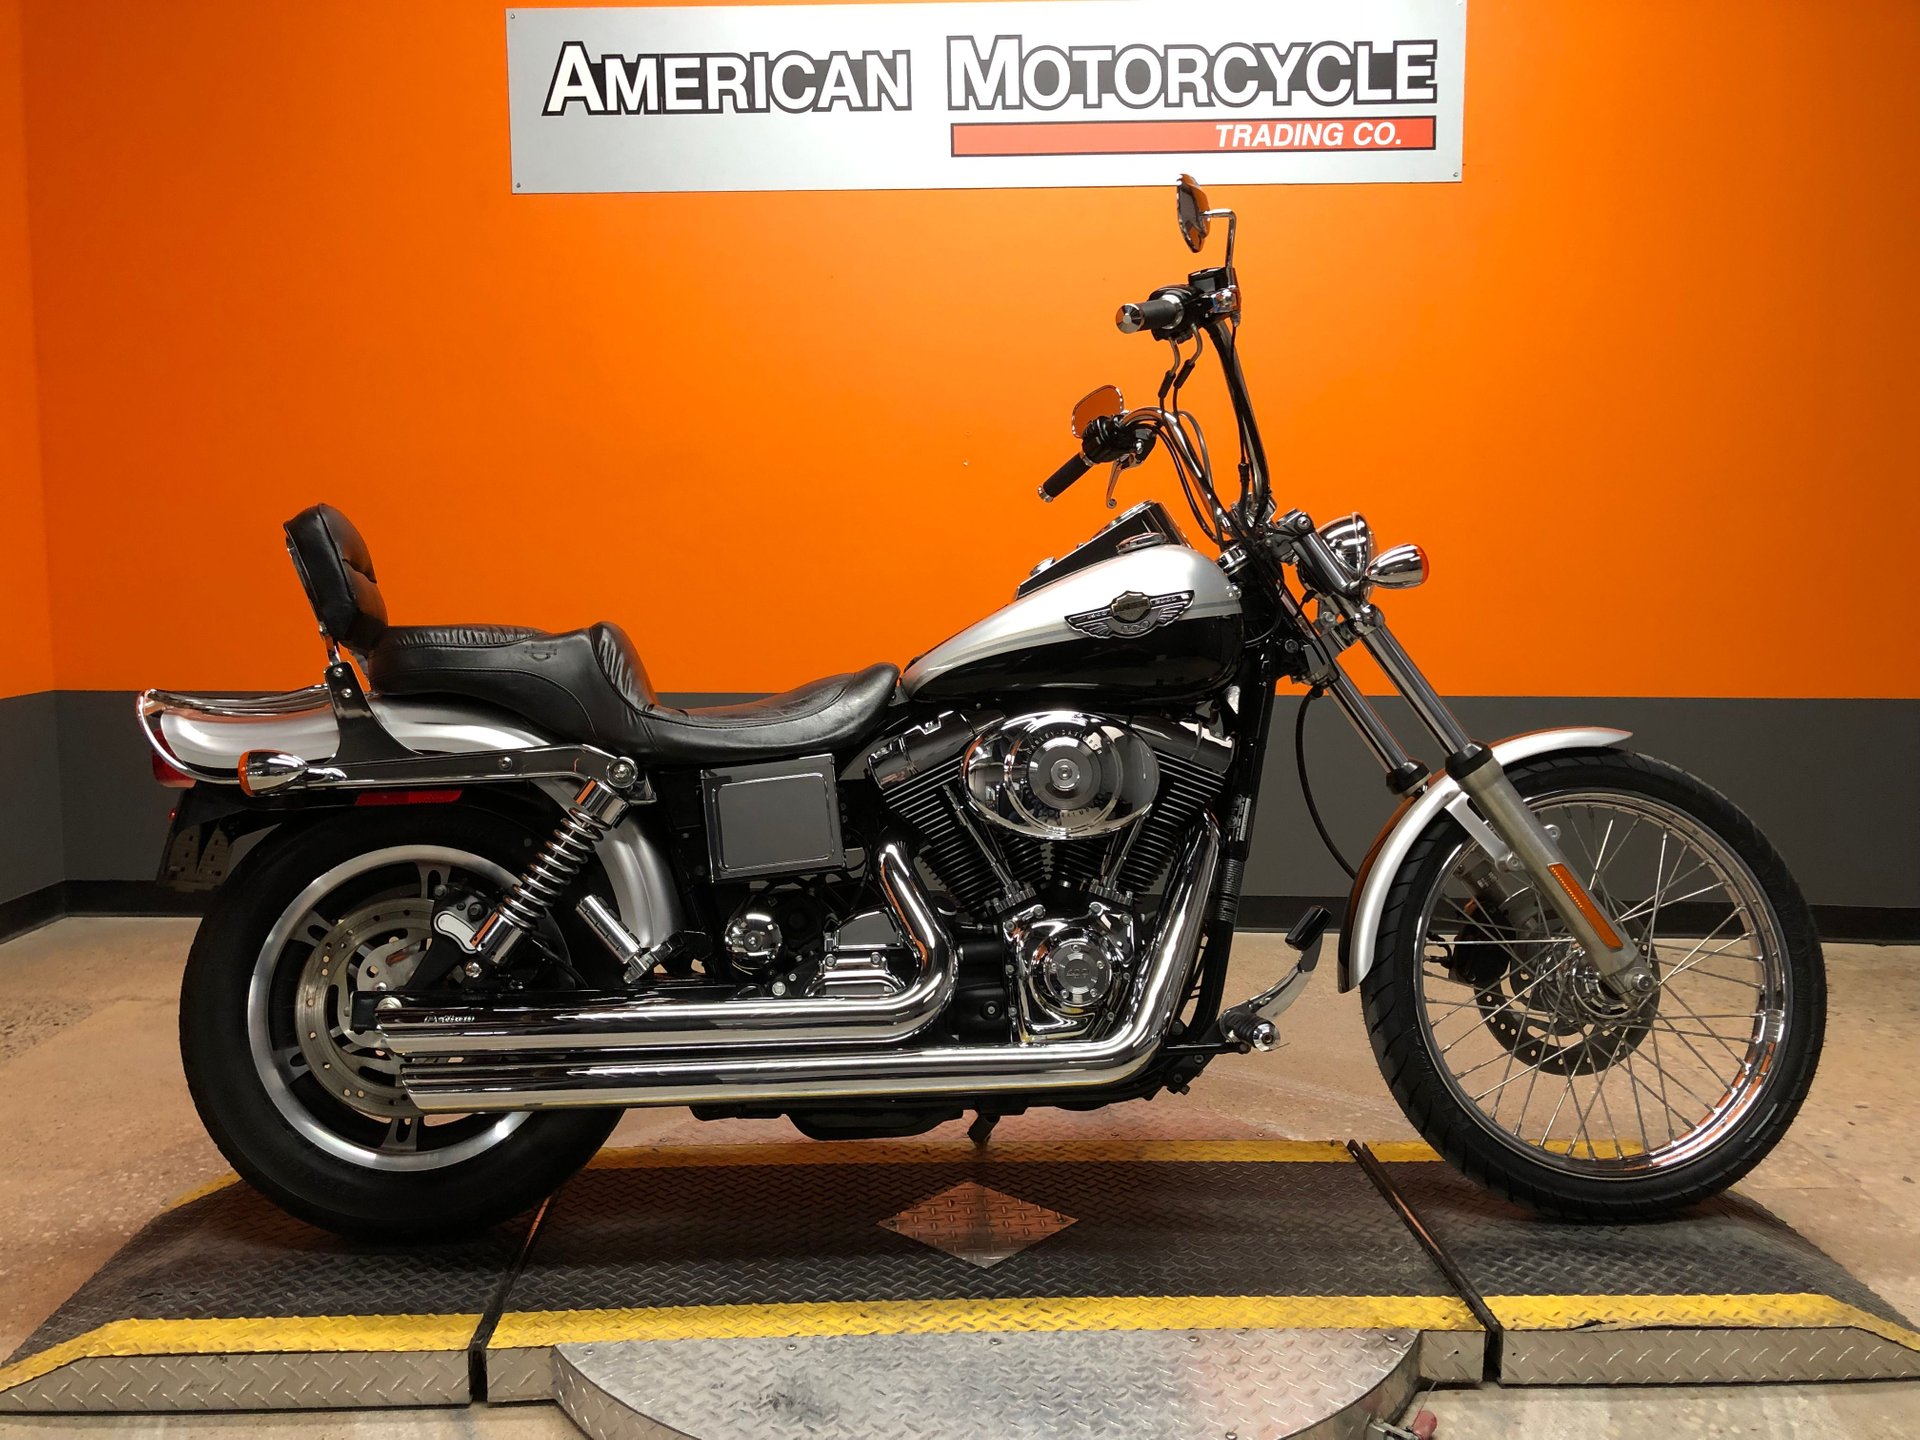 Harley Davidson Dyna Glide How To Remove Fuel Tank Hdforums